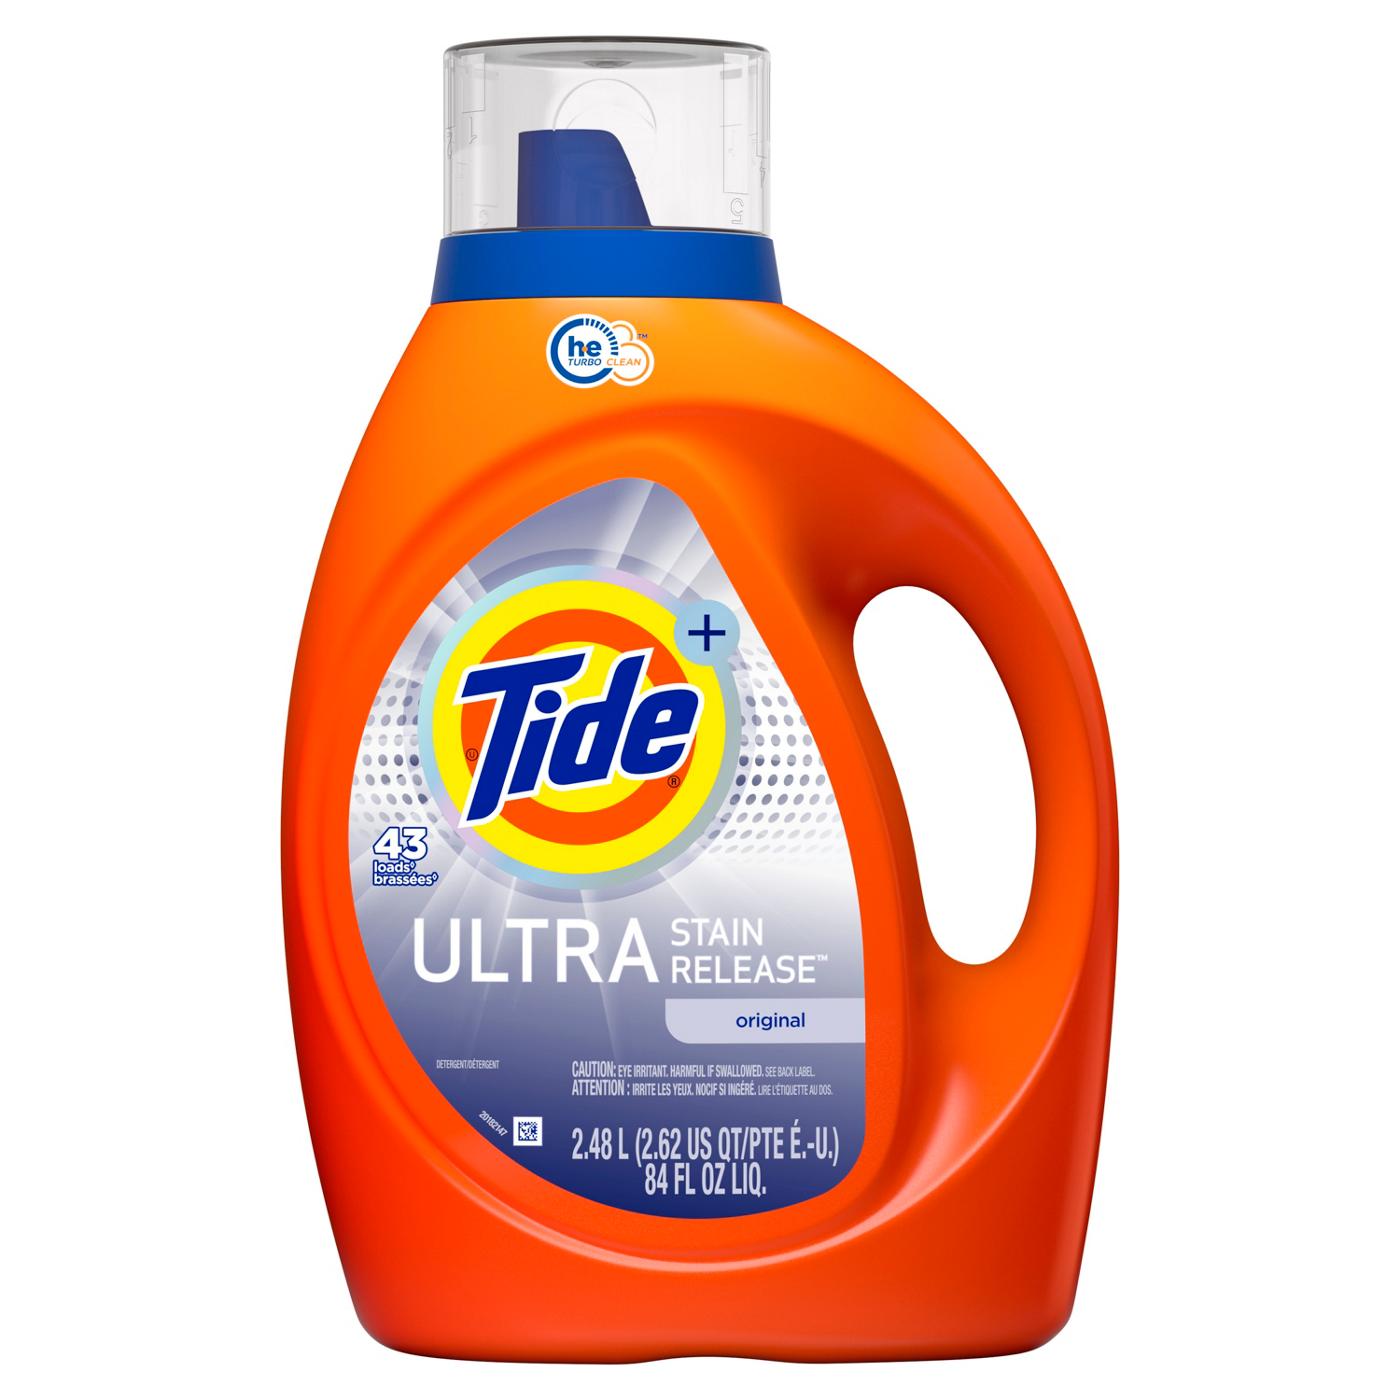 Tide Ultra Stain Release HE Turbo Clean Liquid Laundry Detergent, 43 Loads - Original; image 1 of 6